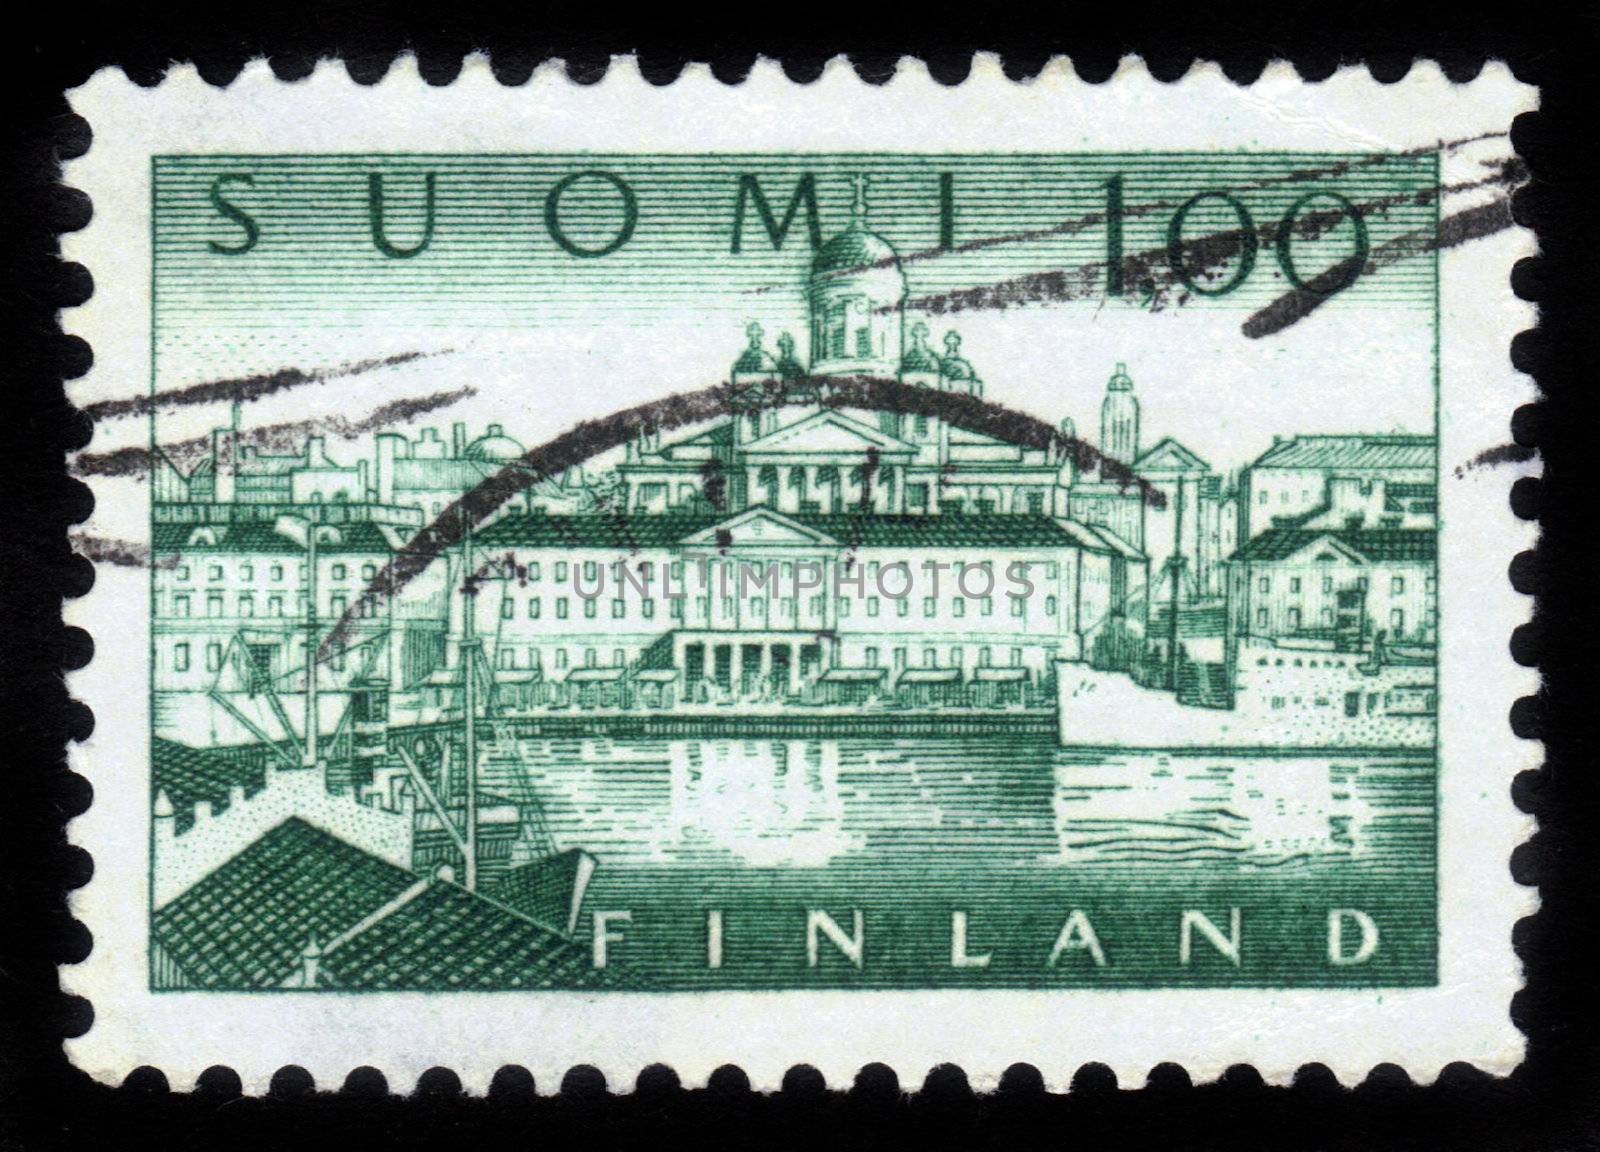 FINLAND - CIRCA 1963: A stamp printed in Finland shows view of Helsinki Harbour: Cathedral at Senate Square, the Finnish National Theatr, circa 1963